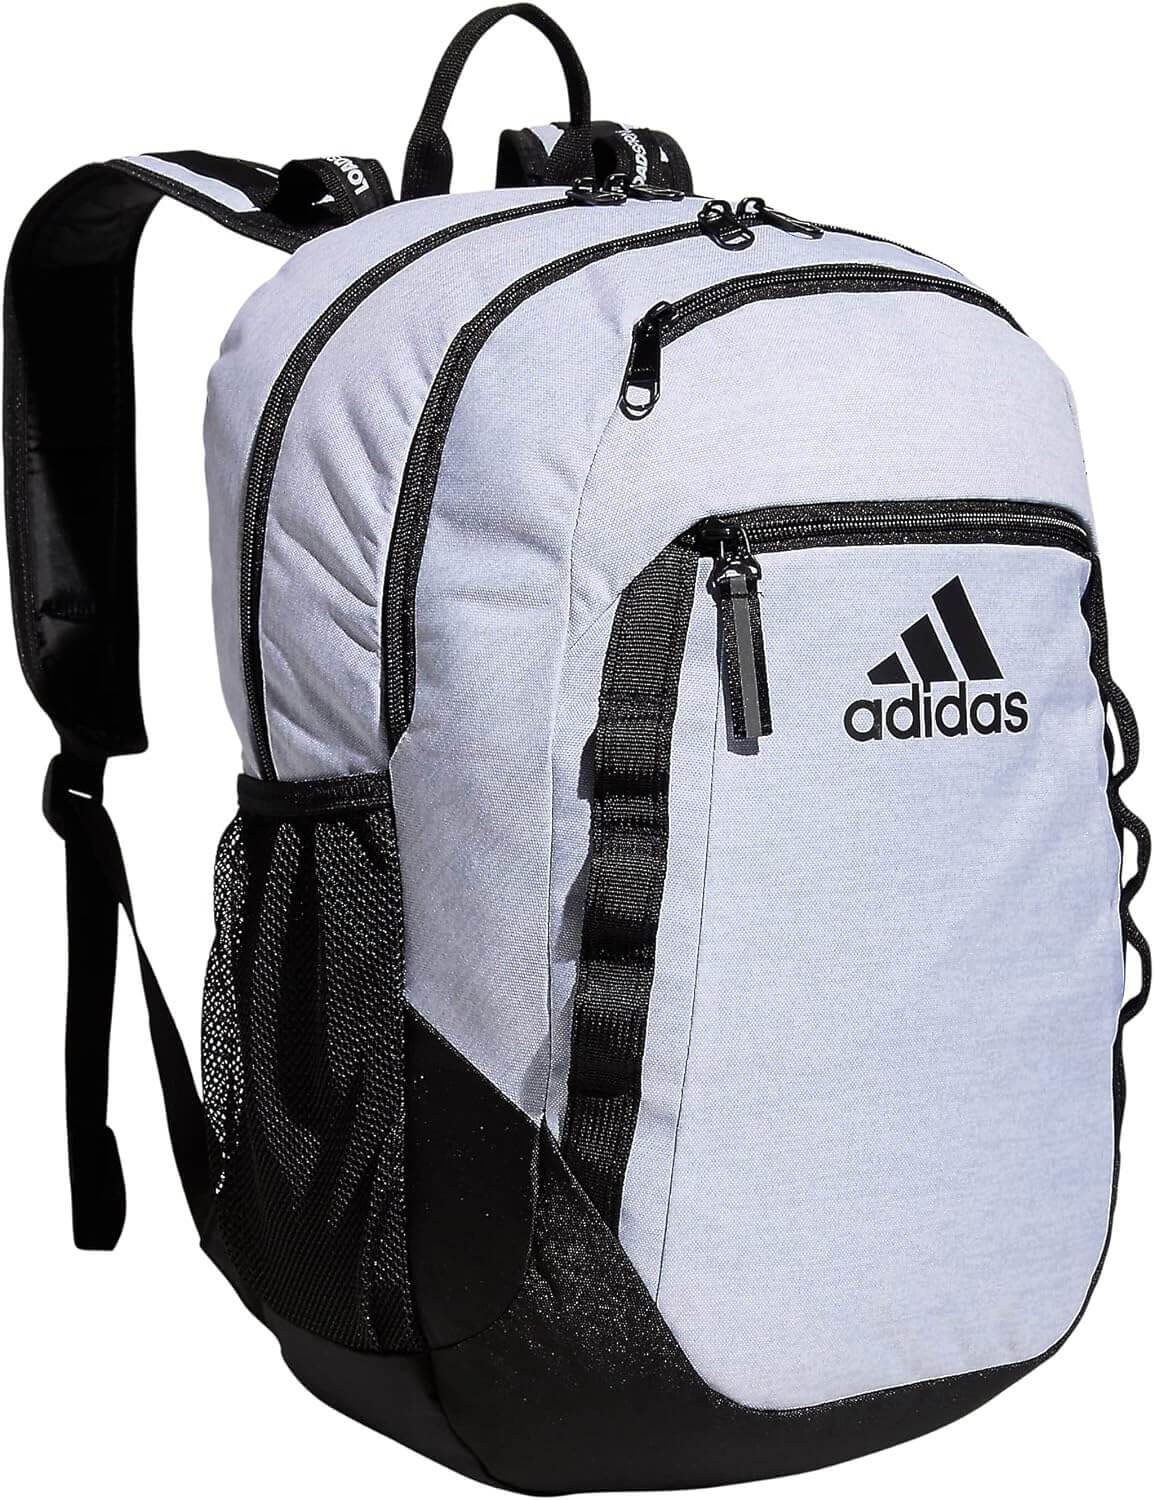 backpack for cruise excursion